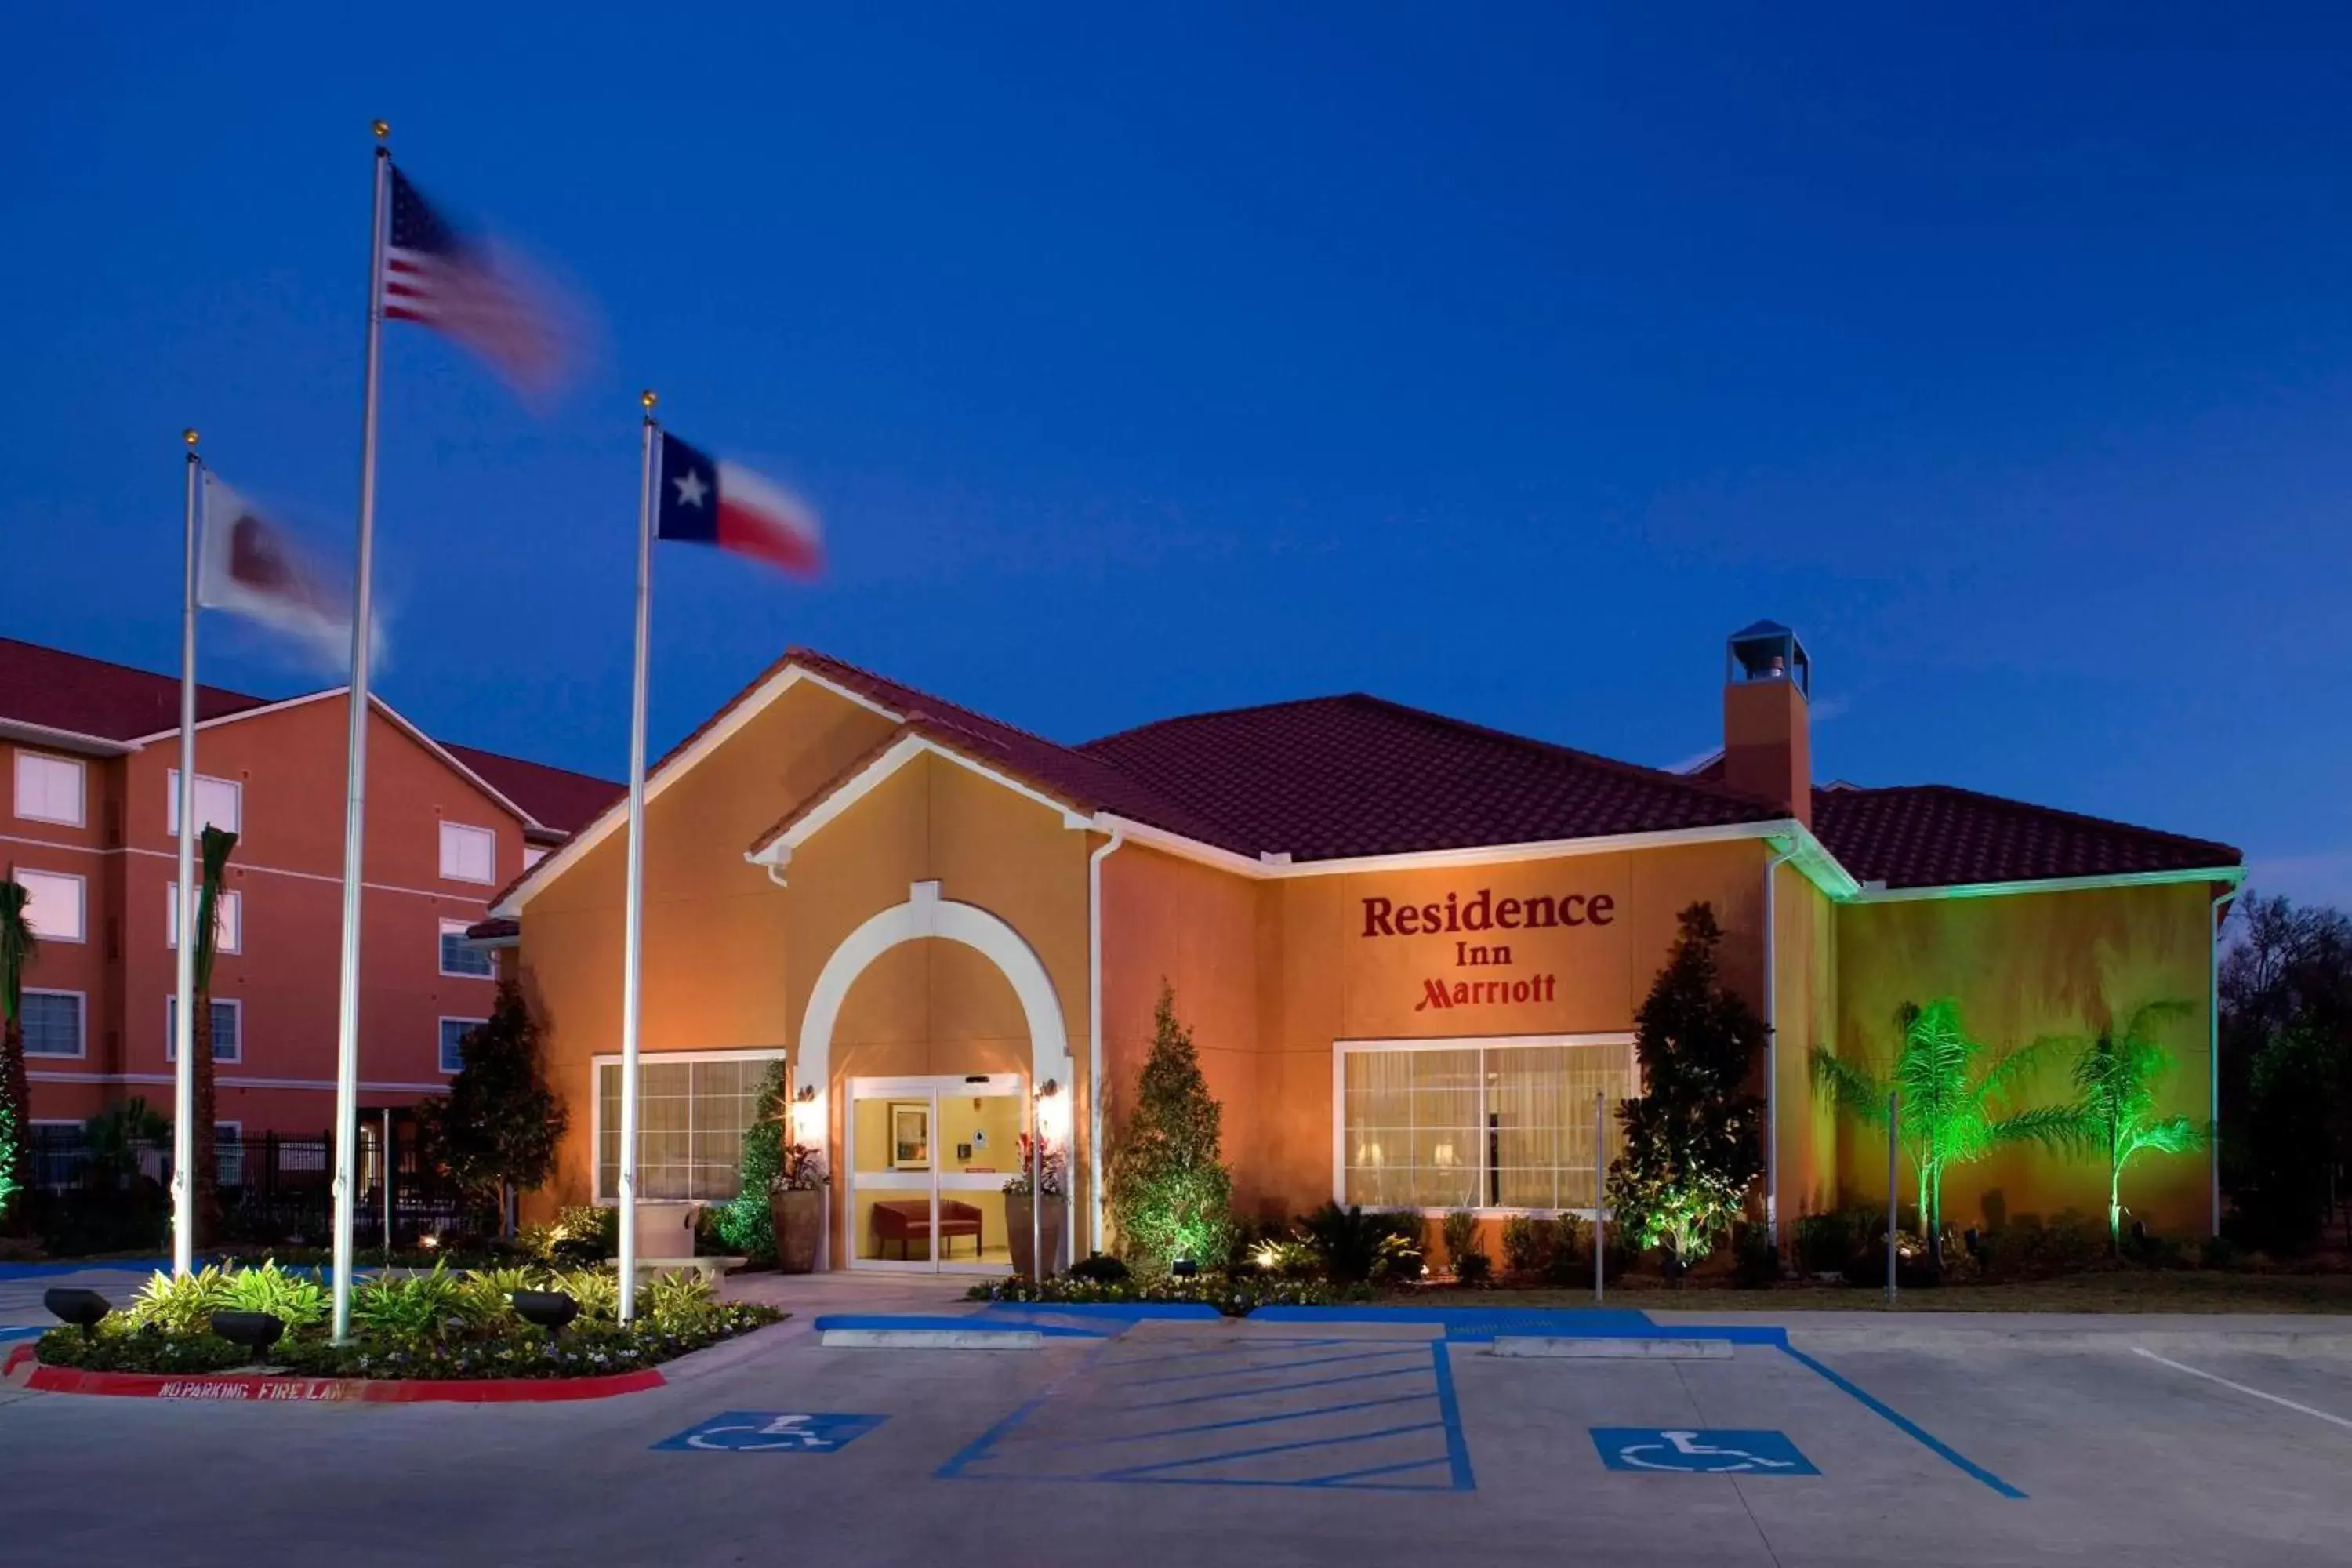 Property Building in Residence Inn Beaumont